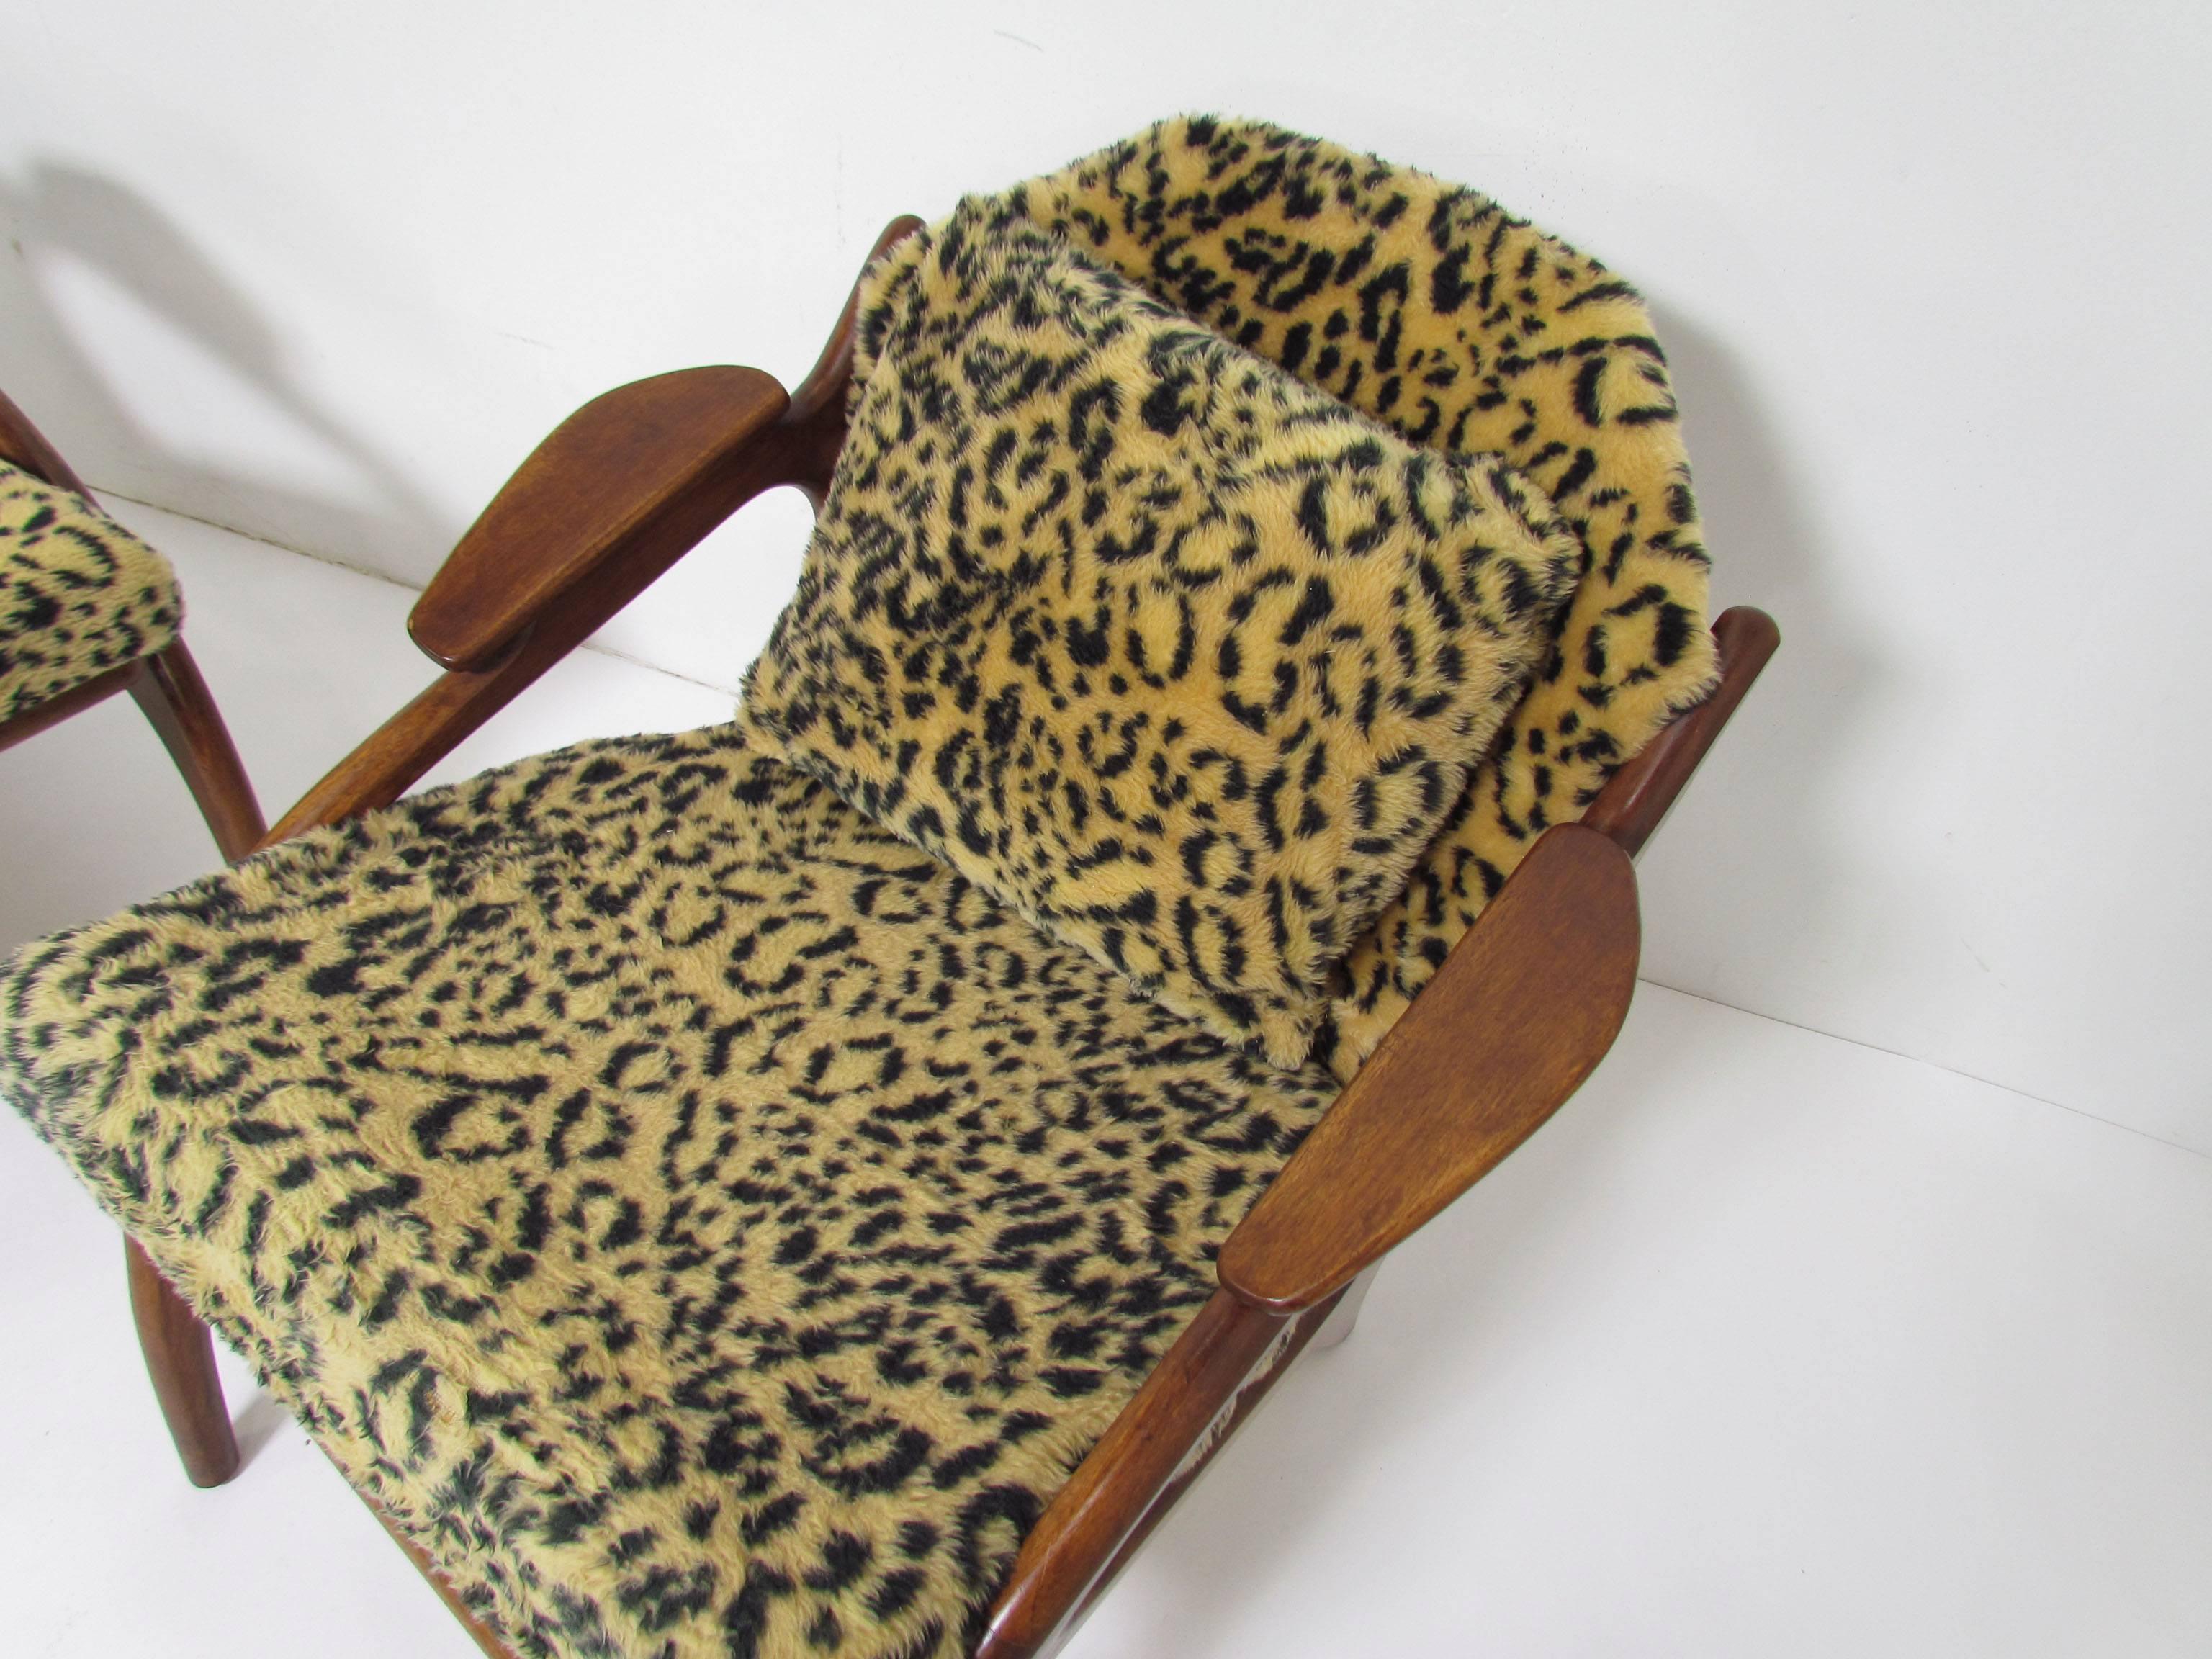 Mid-20th Century Pair of Sculptural Lounge Chairs by Adrian Pearsall for Craft Associates